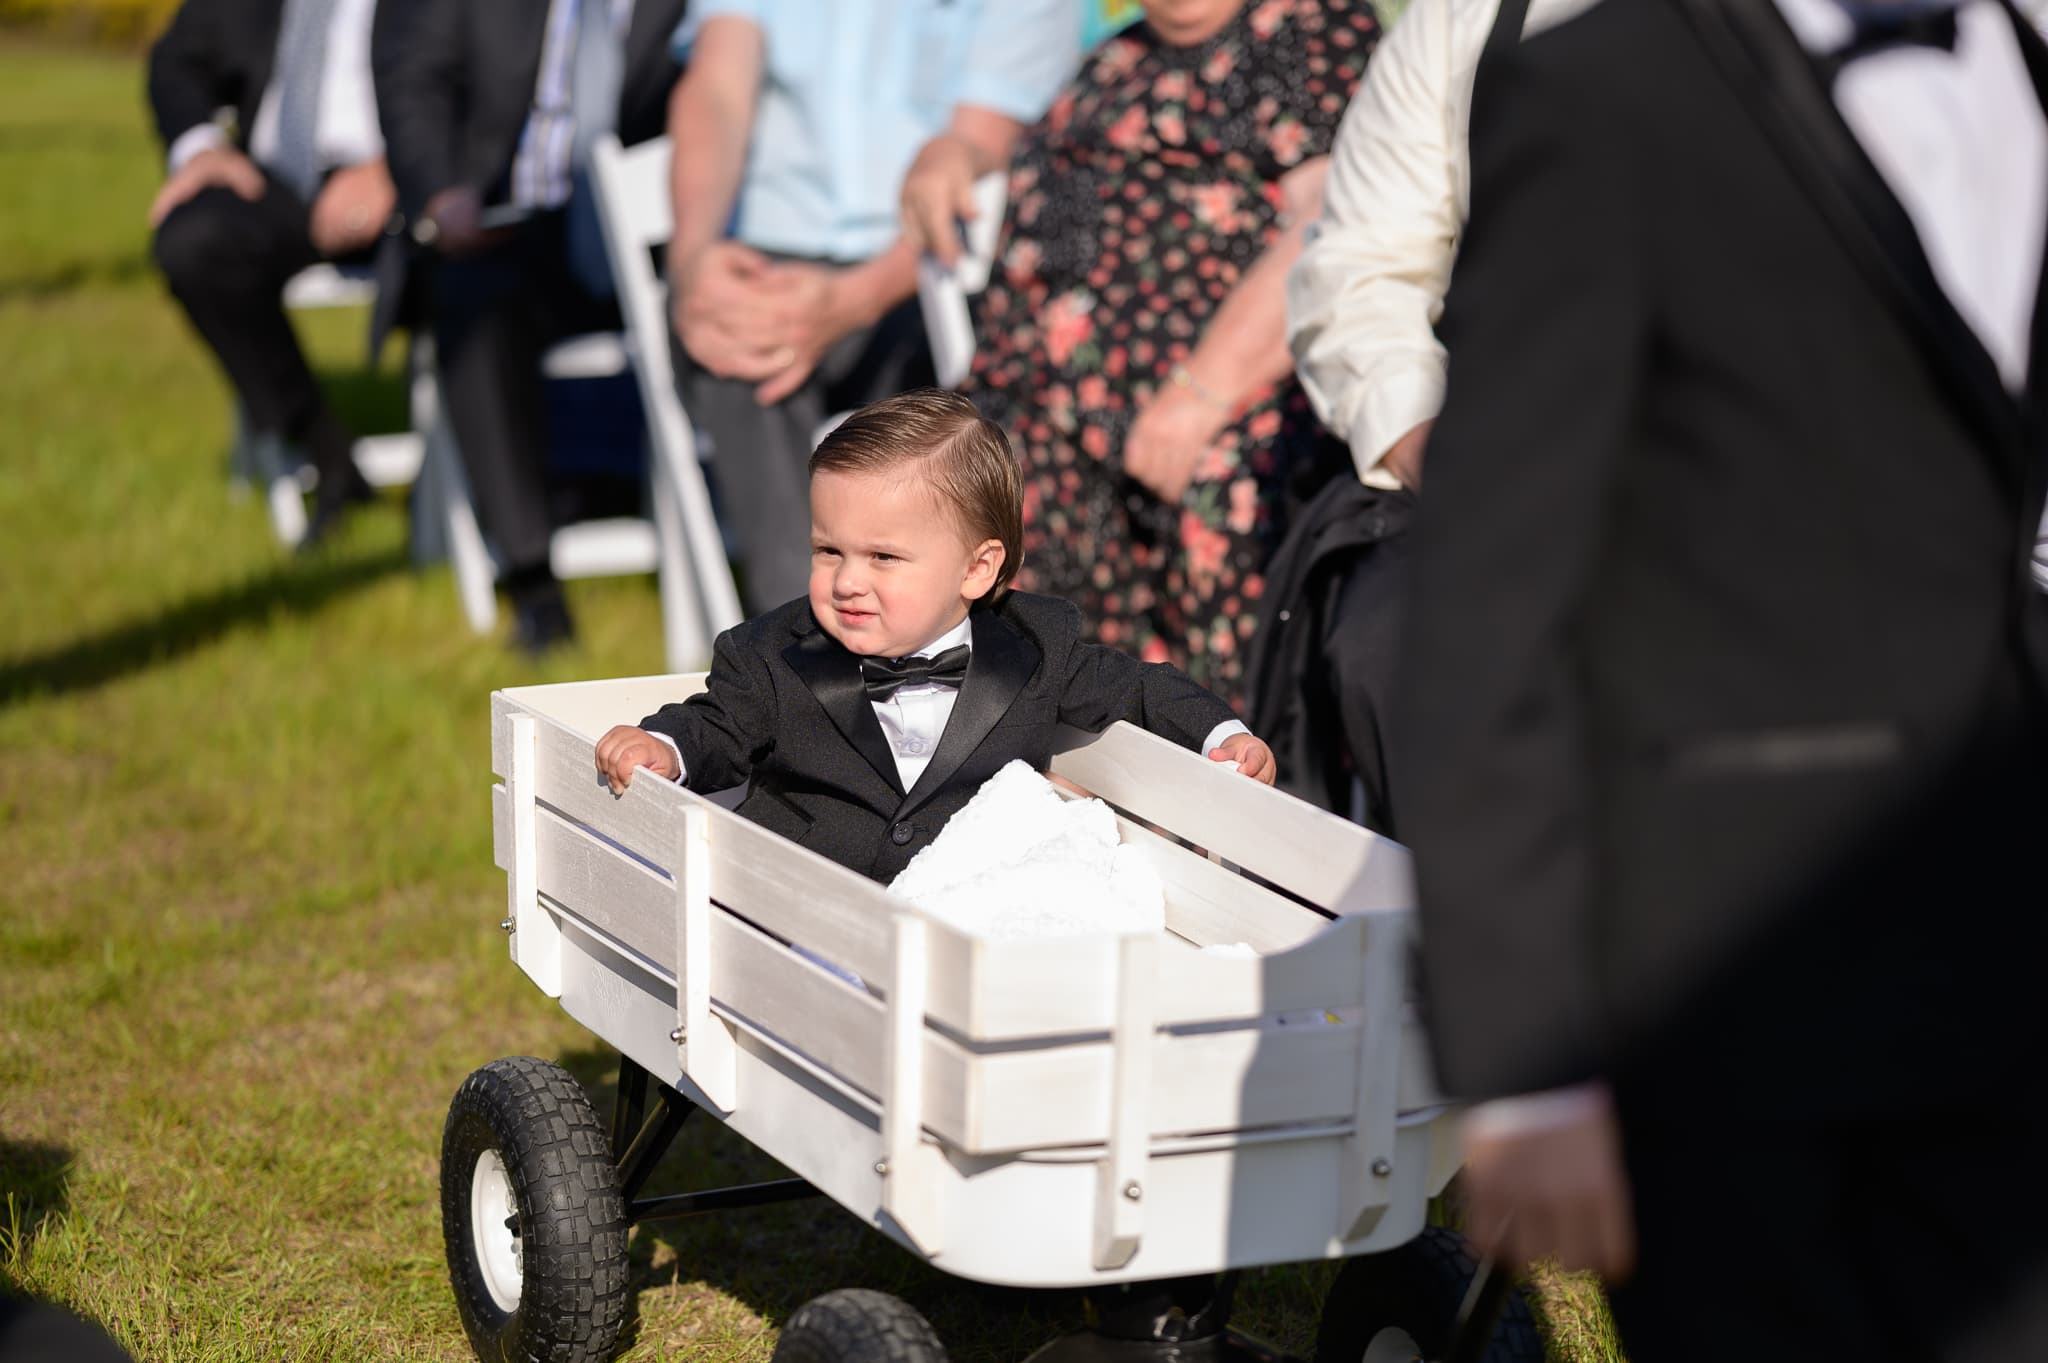 Ring-bearer riding in wagon - The Venue at White Oaks Farm